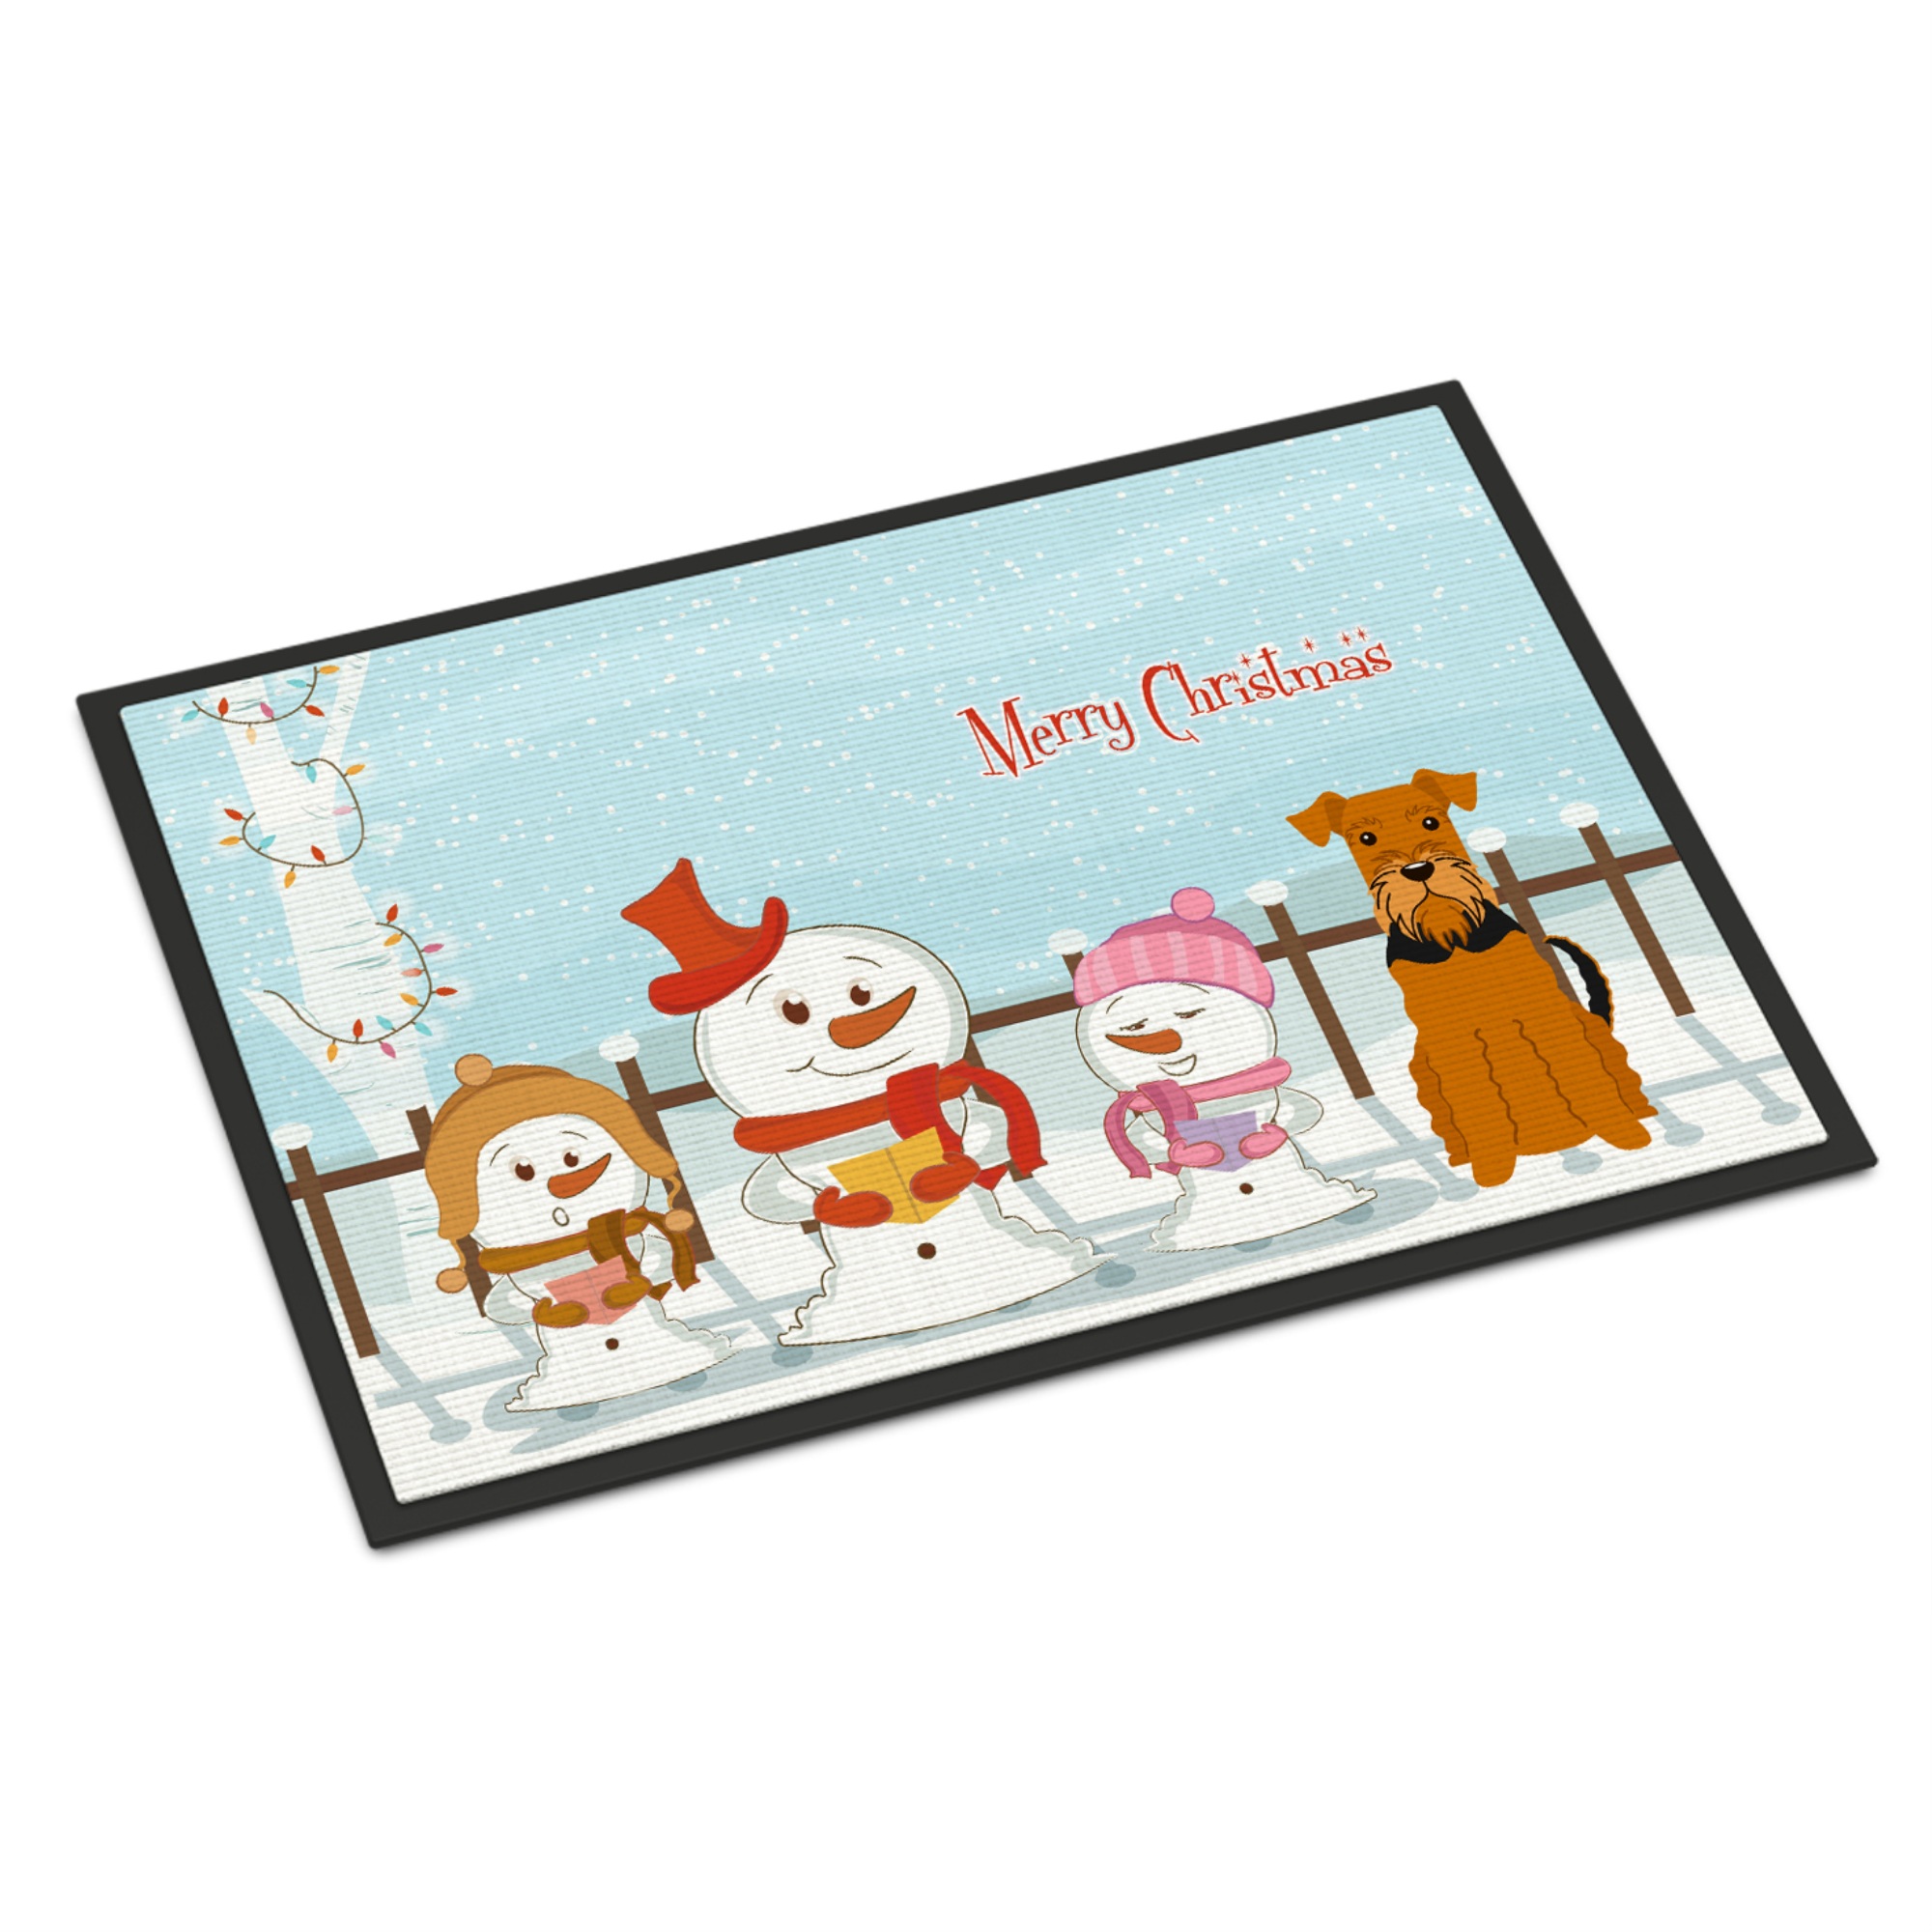 Caroline's Treasures "Caroline's Treasures Merry Christmas Carolers Airedale Indoor or Outdoor Mat 24x36 BB2372JMAT 24 x 36"" Multicolor"